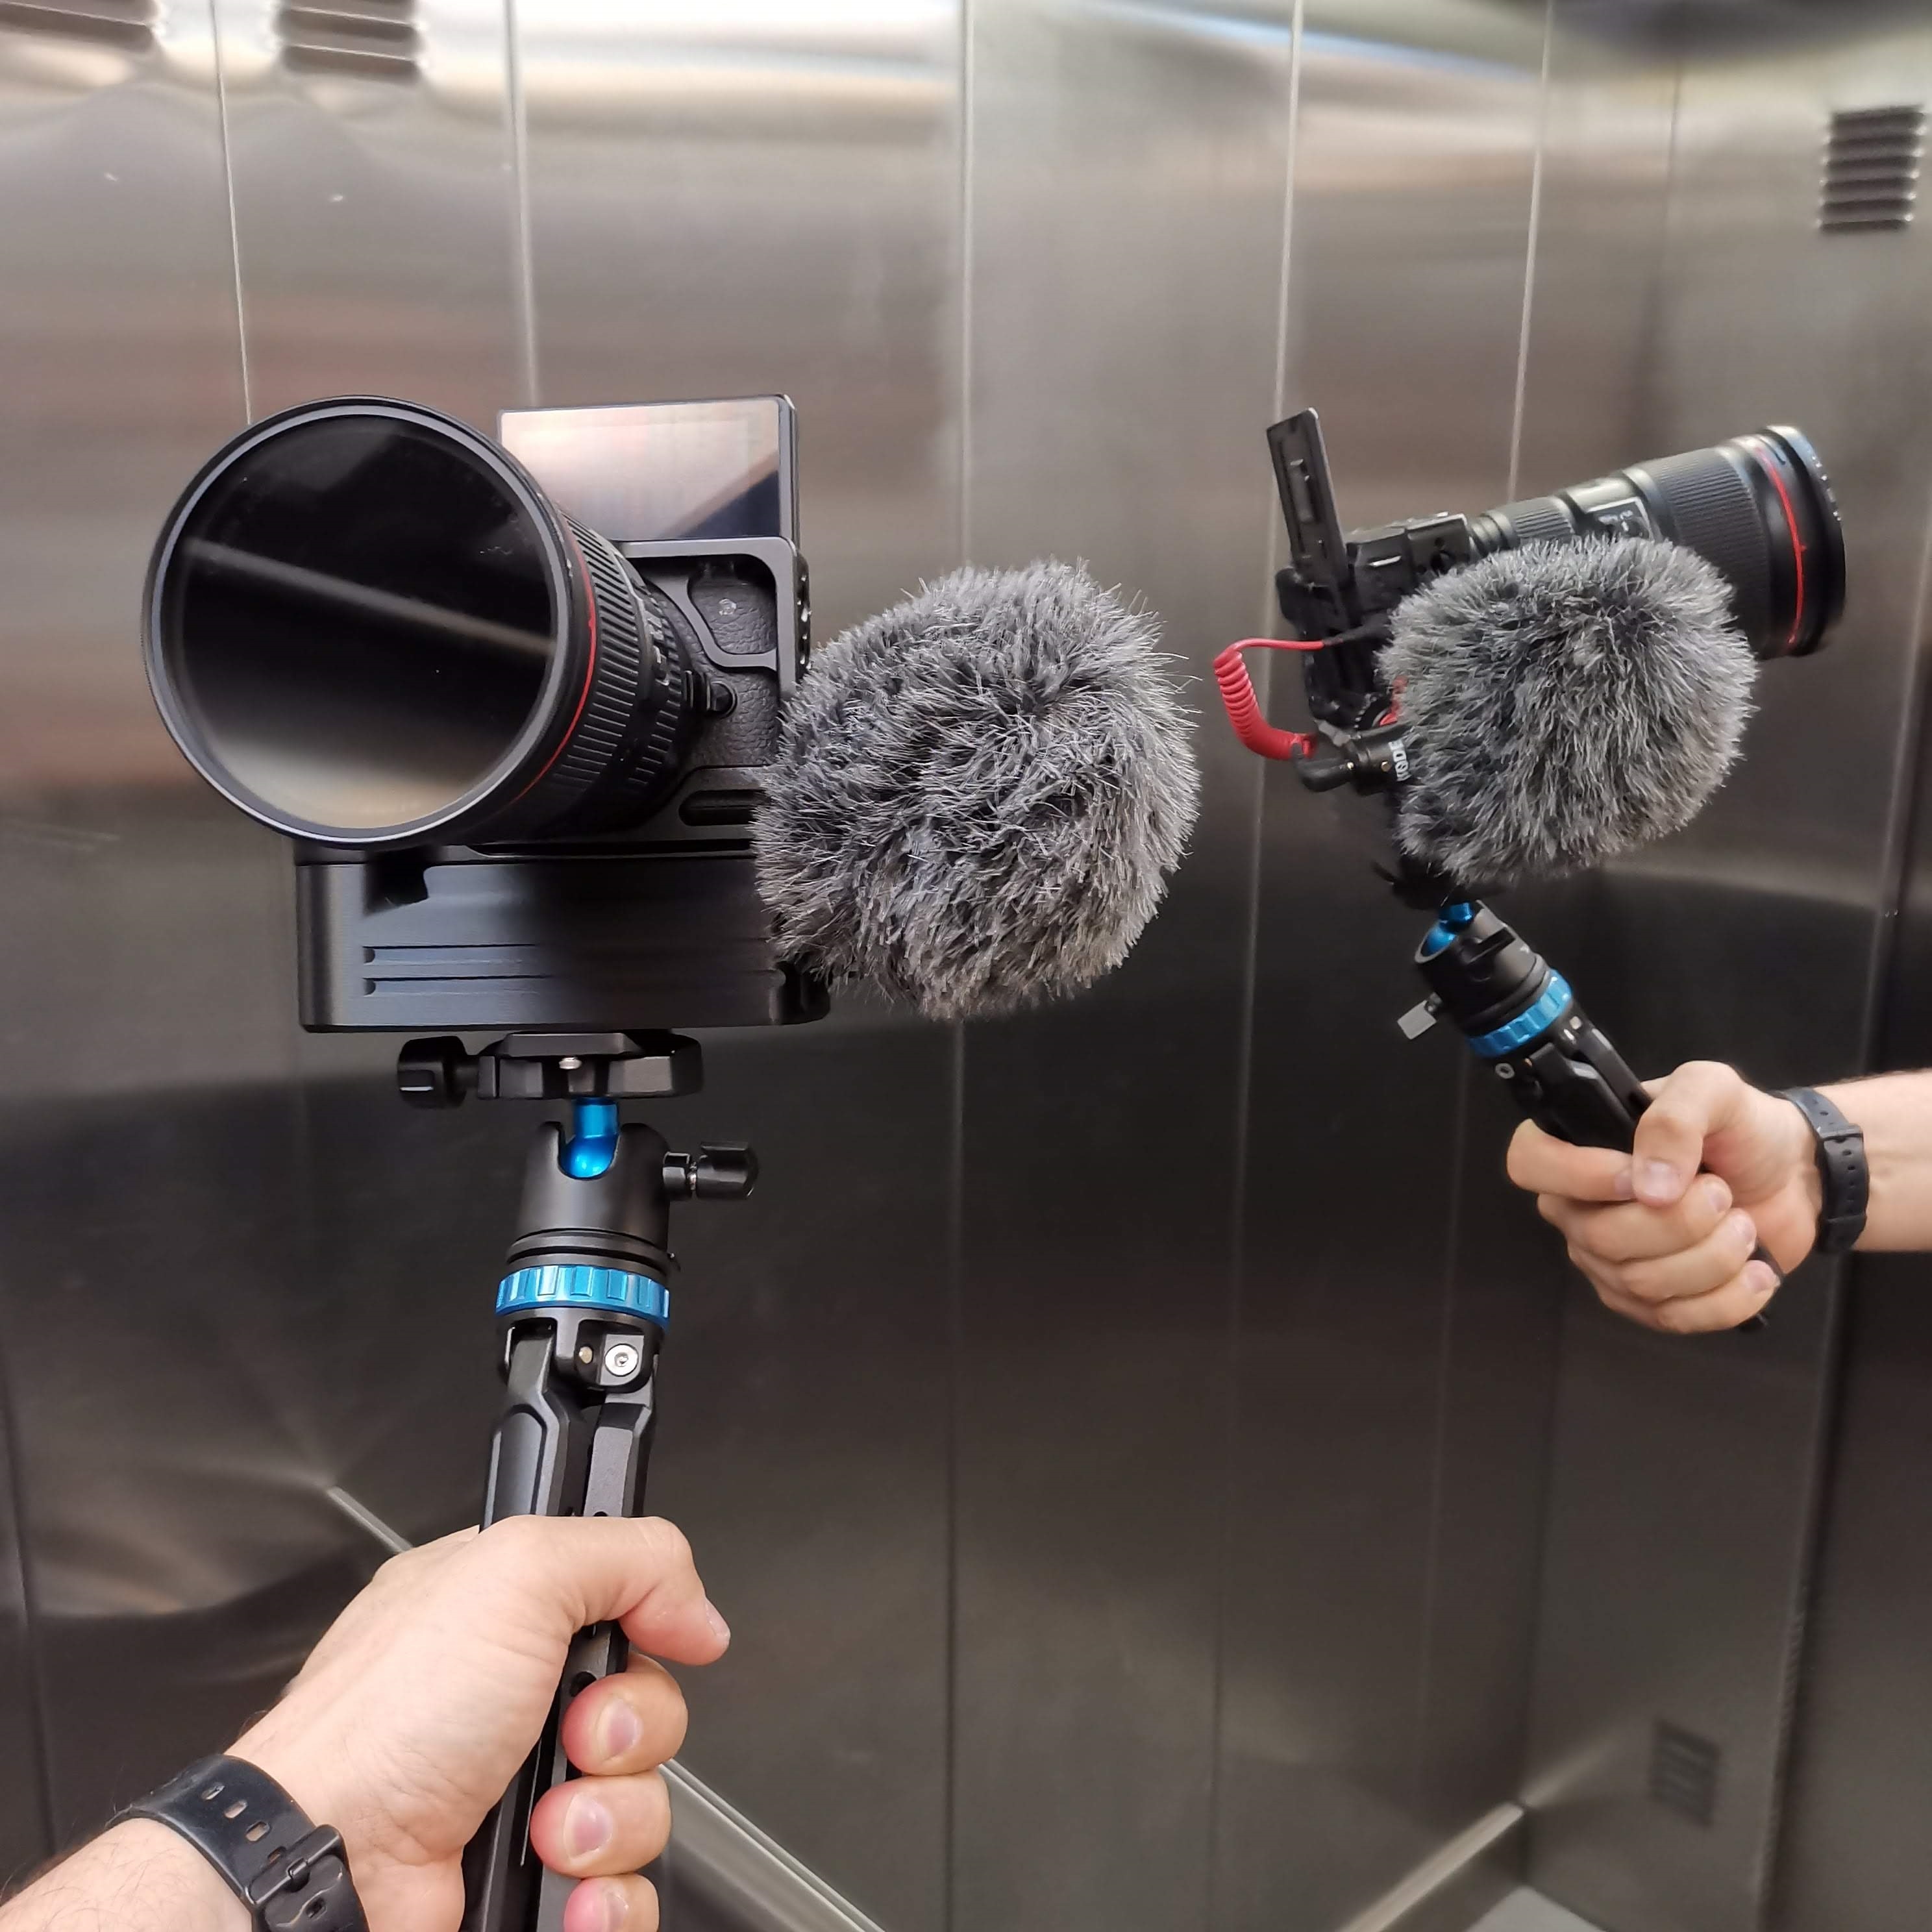 One of the best vlogging setups we had in our hands. Is it bettet for vlogging than EOS RP?